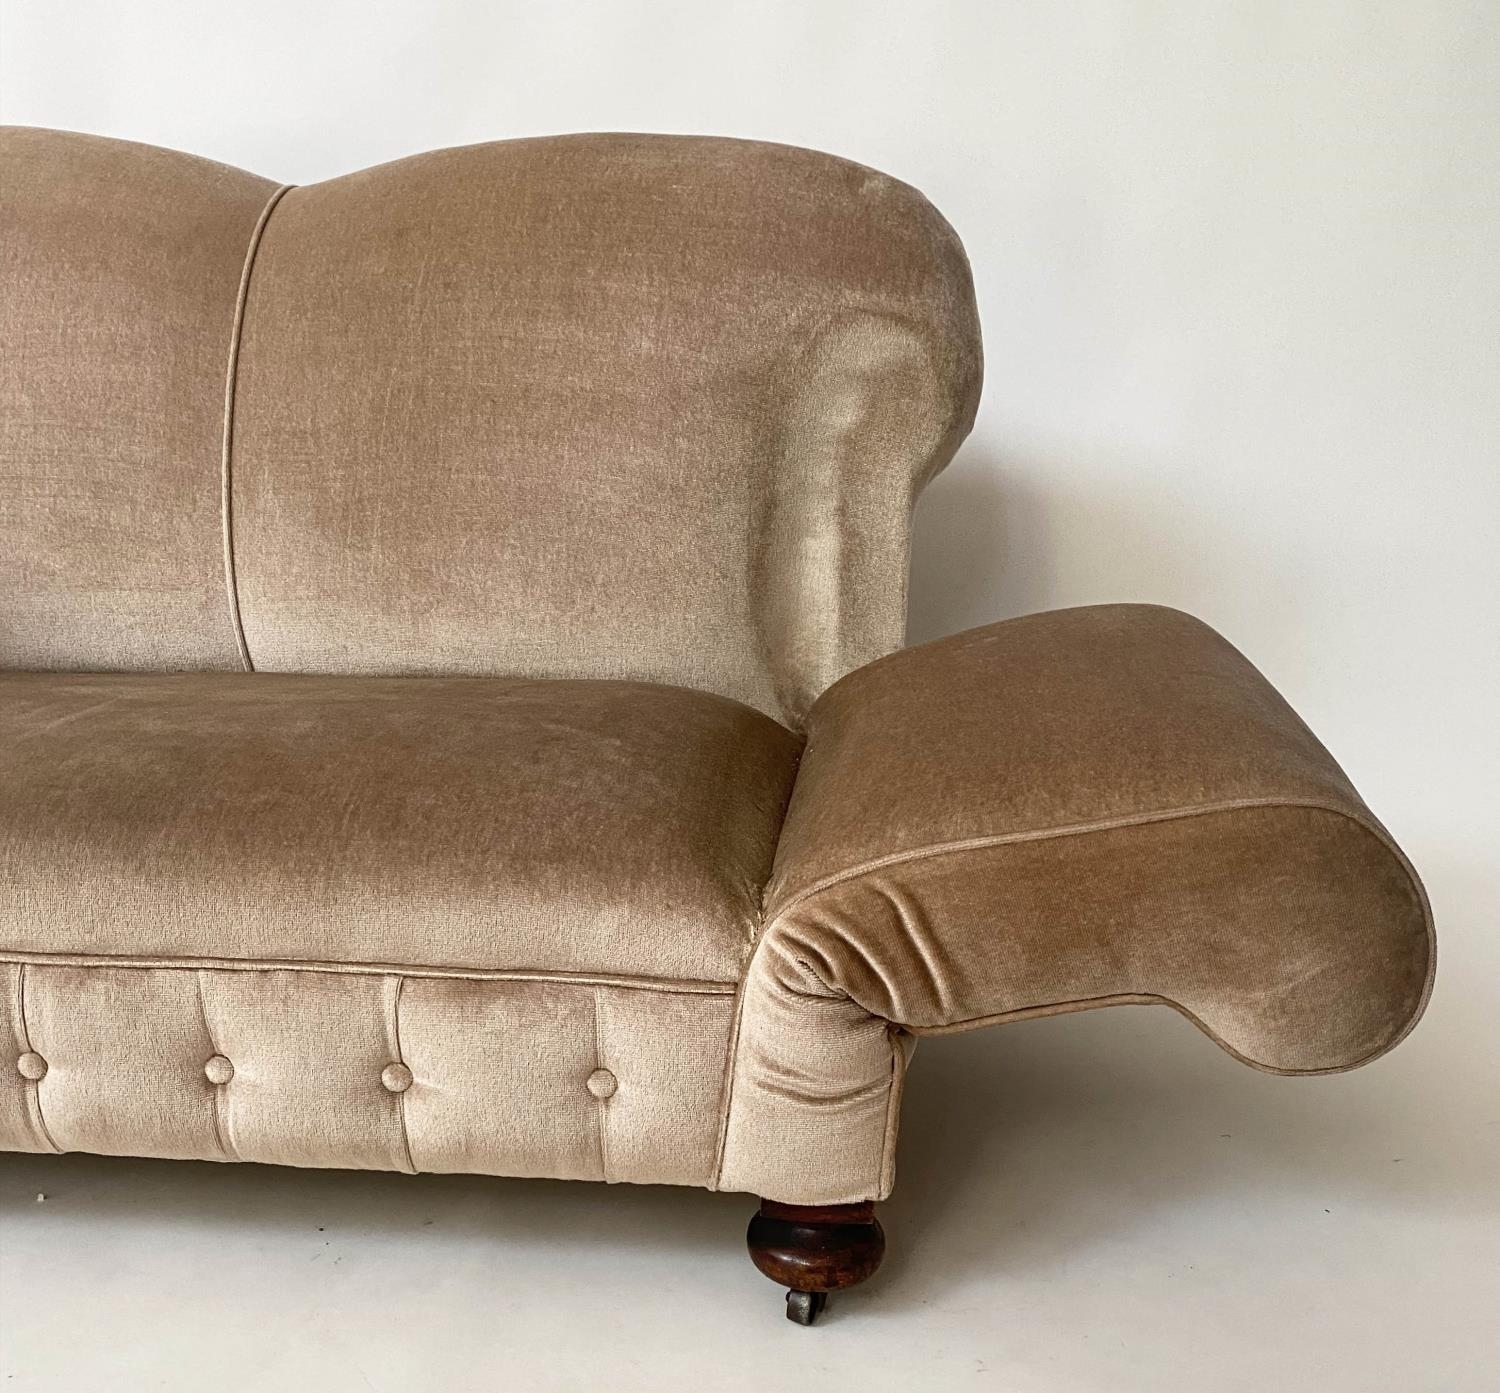 SOFA, 140cm W x 159cm arm down Edwardian two seater with drop arm and button taupe velvet - Image 6 of 8